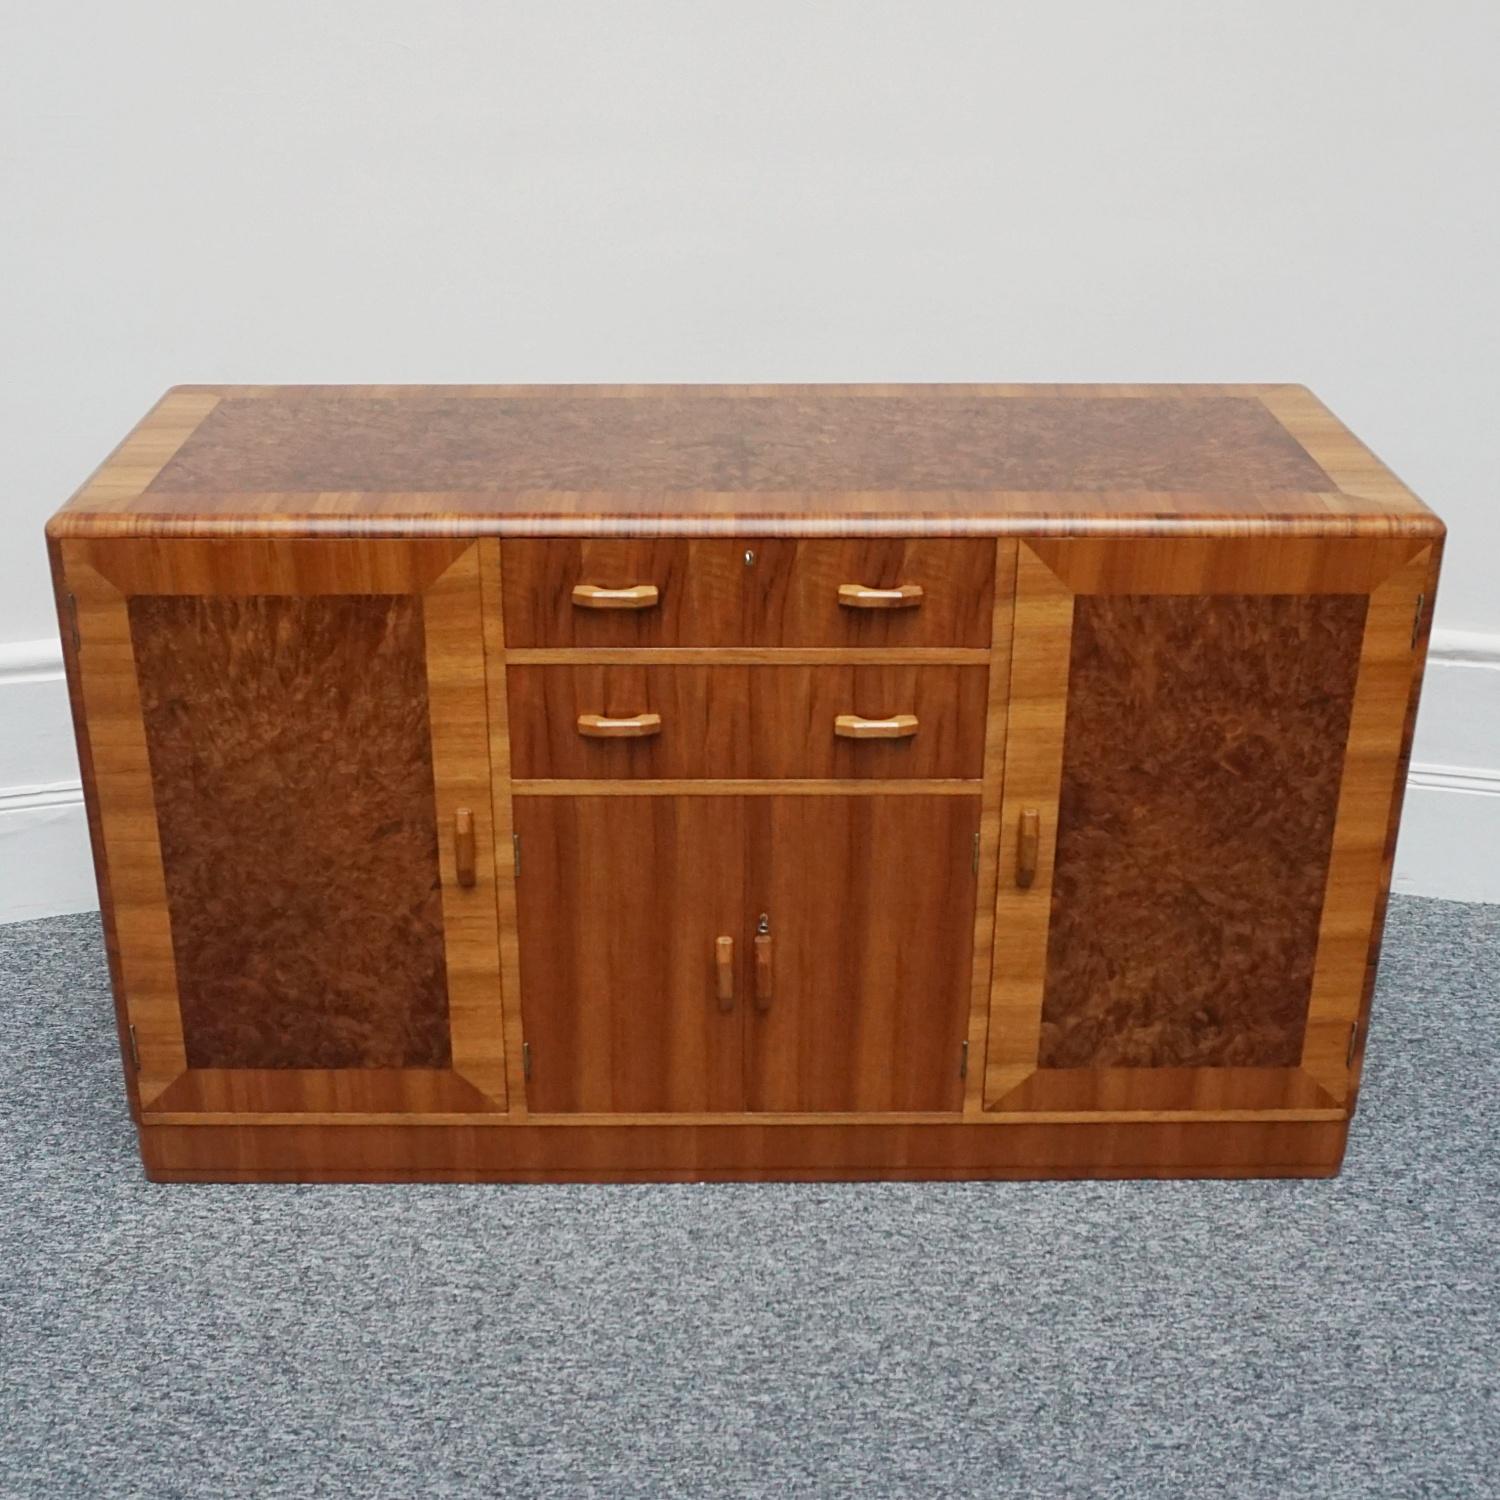 An Art Deco sideboard by Heal's of London. Burr walnut veneered with figured walnut banding on solid mahogany/ Original walnut handles. Two central upper drawers with lower cupboard section. To either side cabinet doors open to glass shelved